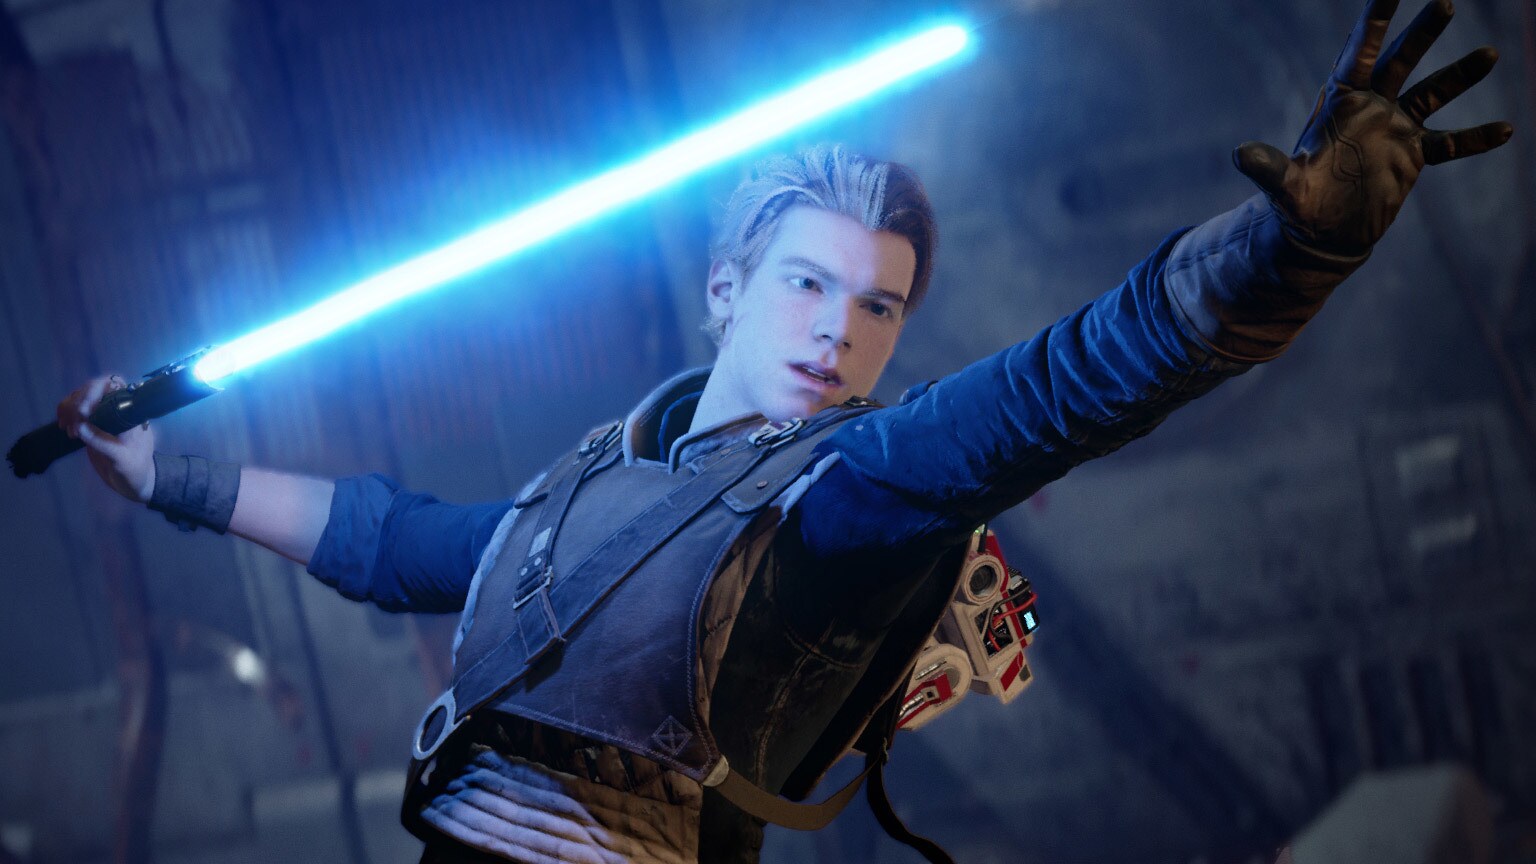 EA Play 2019: Star Wars Jedi: Fallen Order Details and Gameplay Revealed